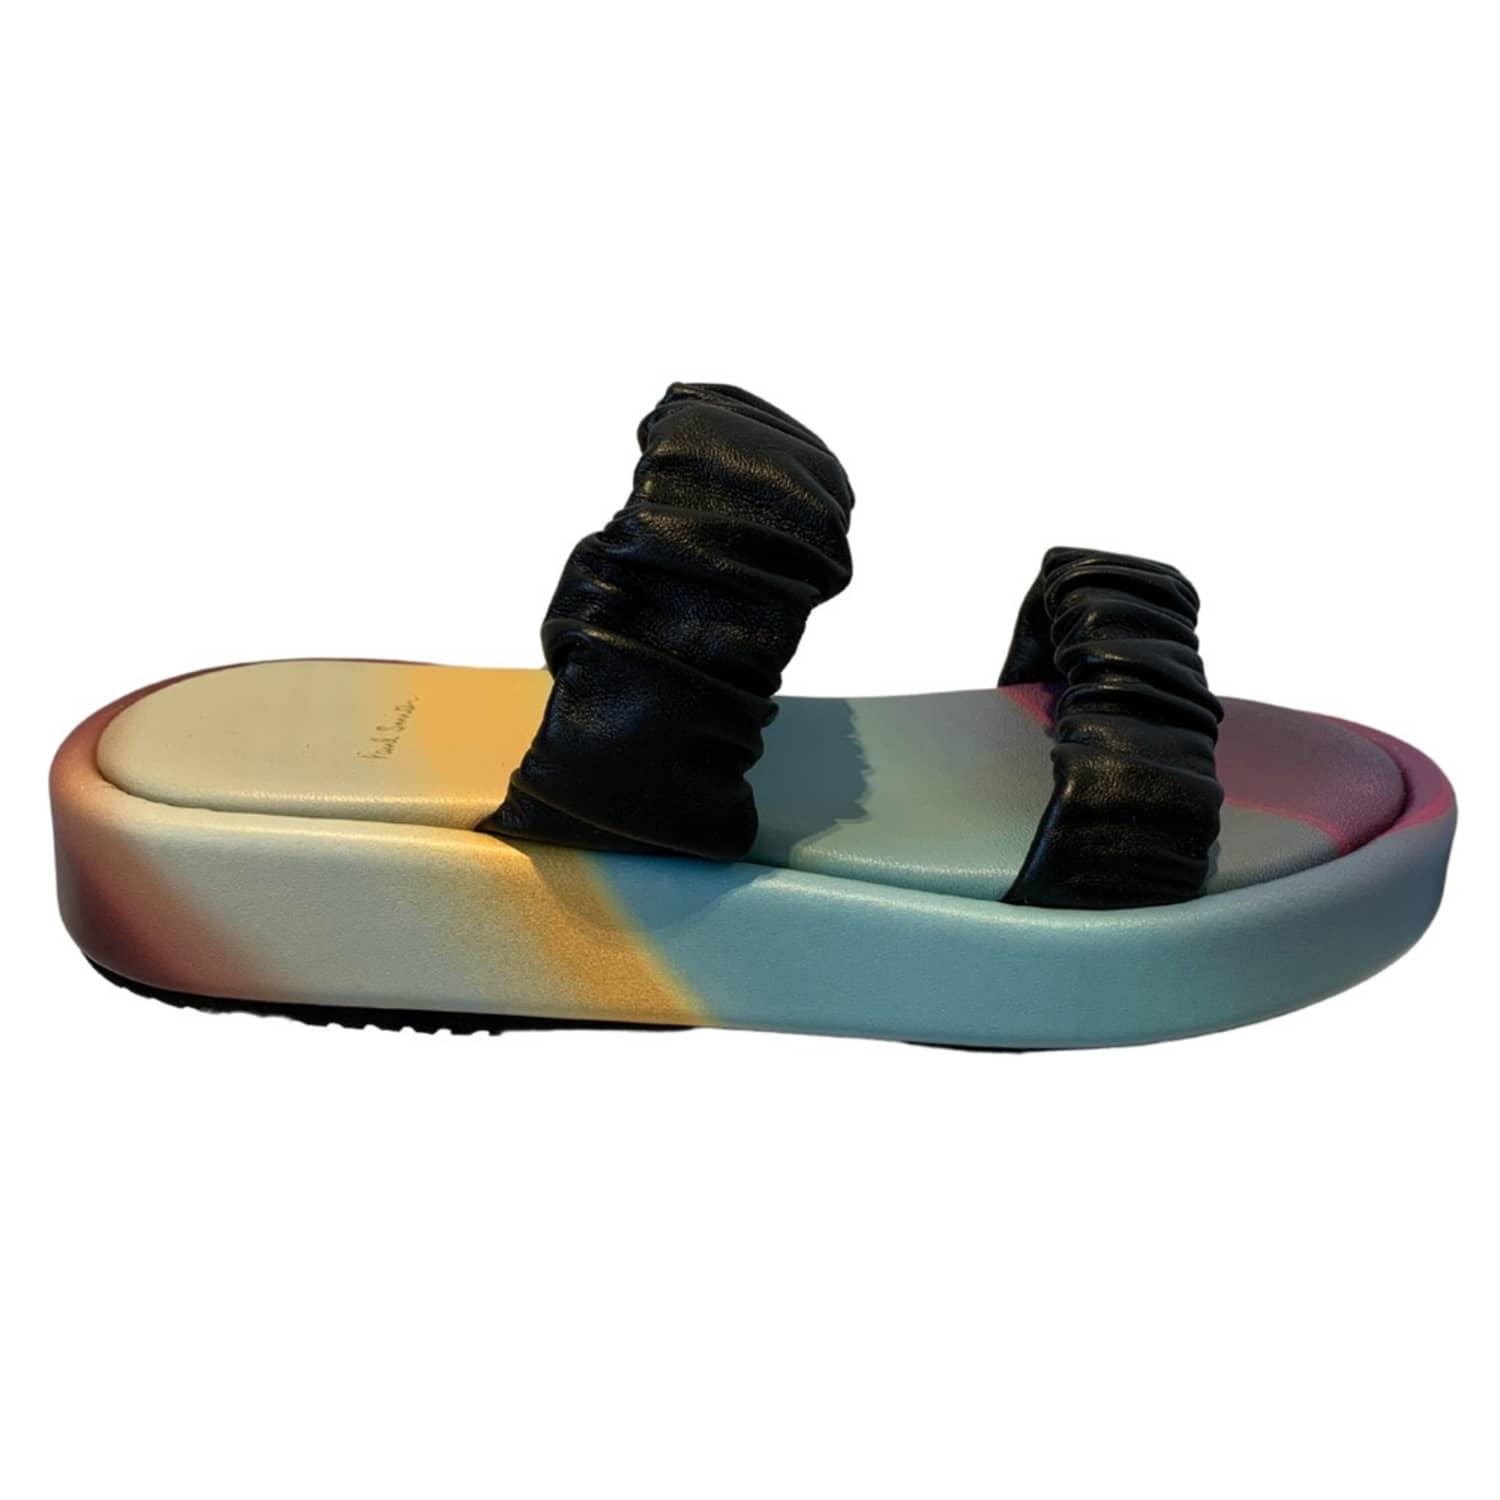 Paul Smith Black Leather Maple Sandals | Lyst